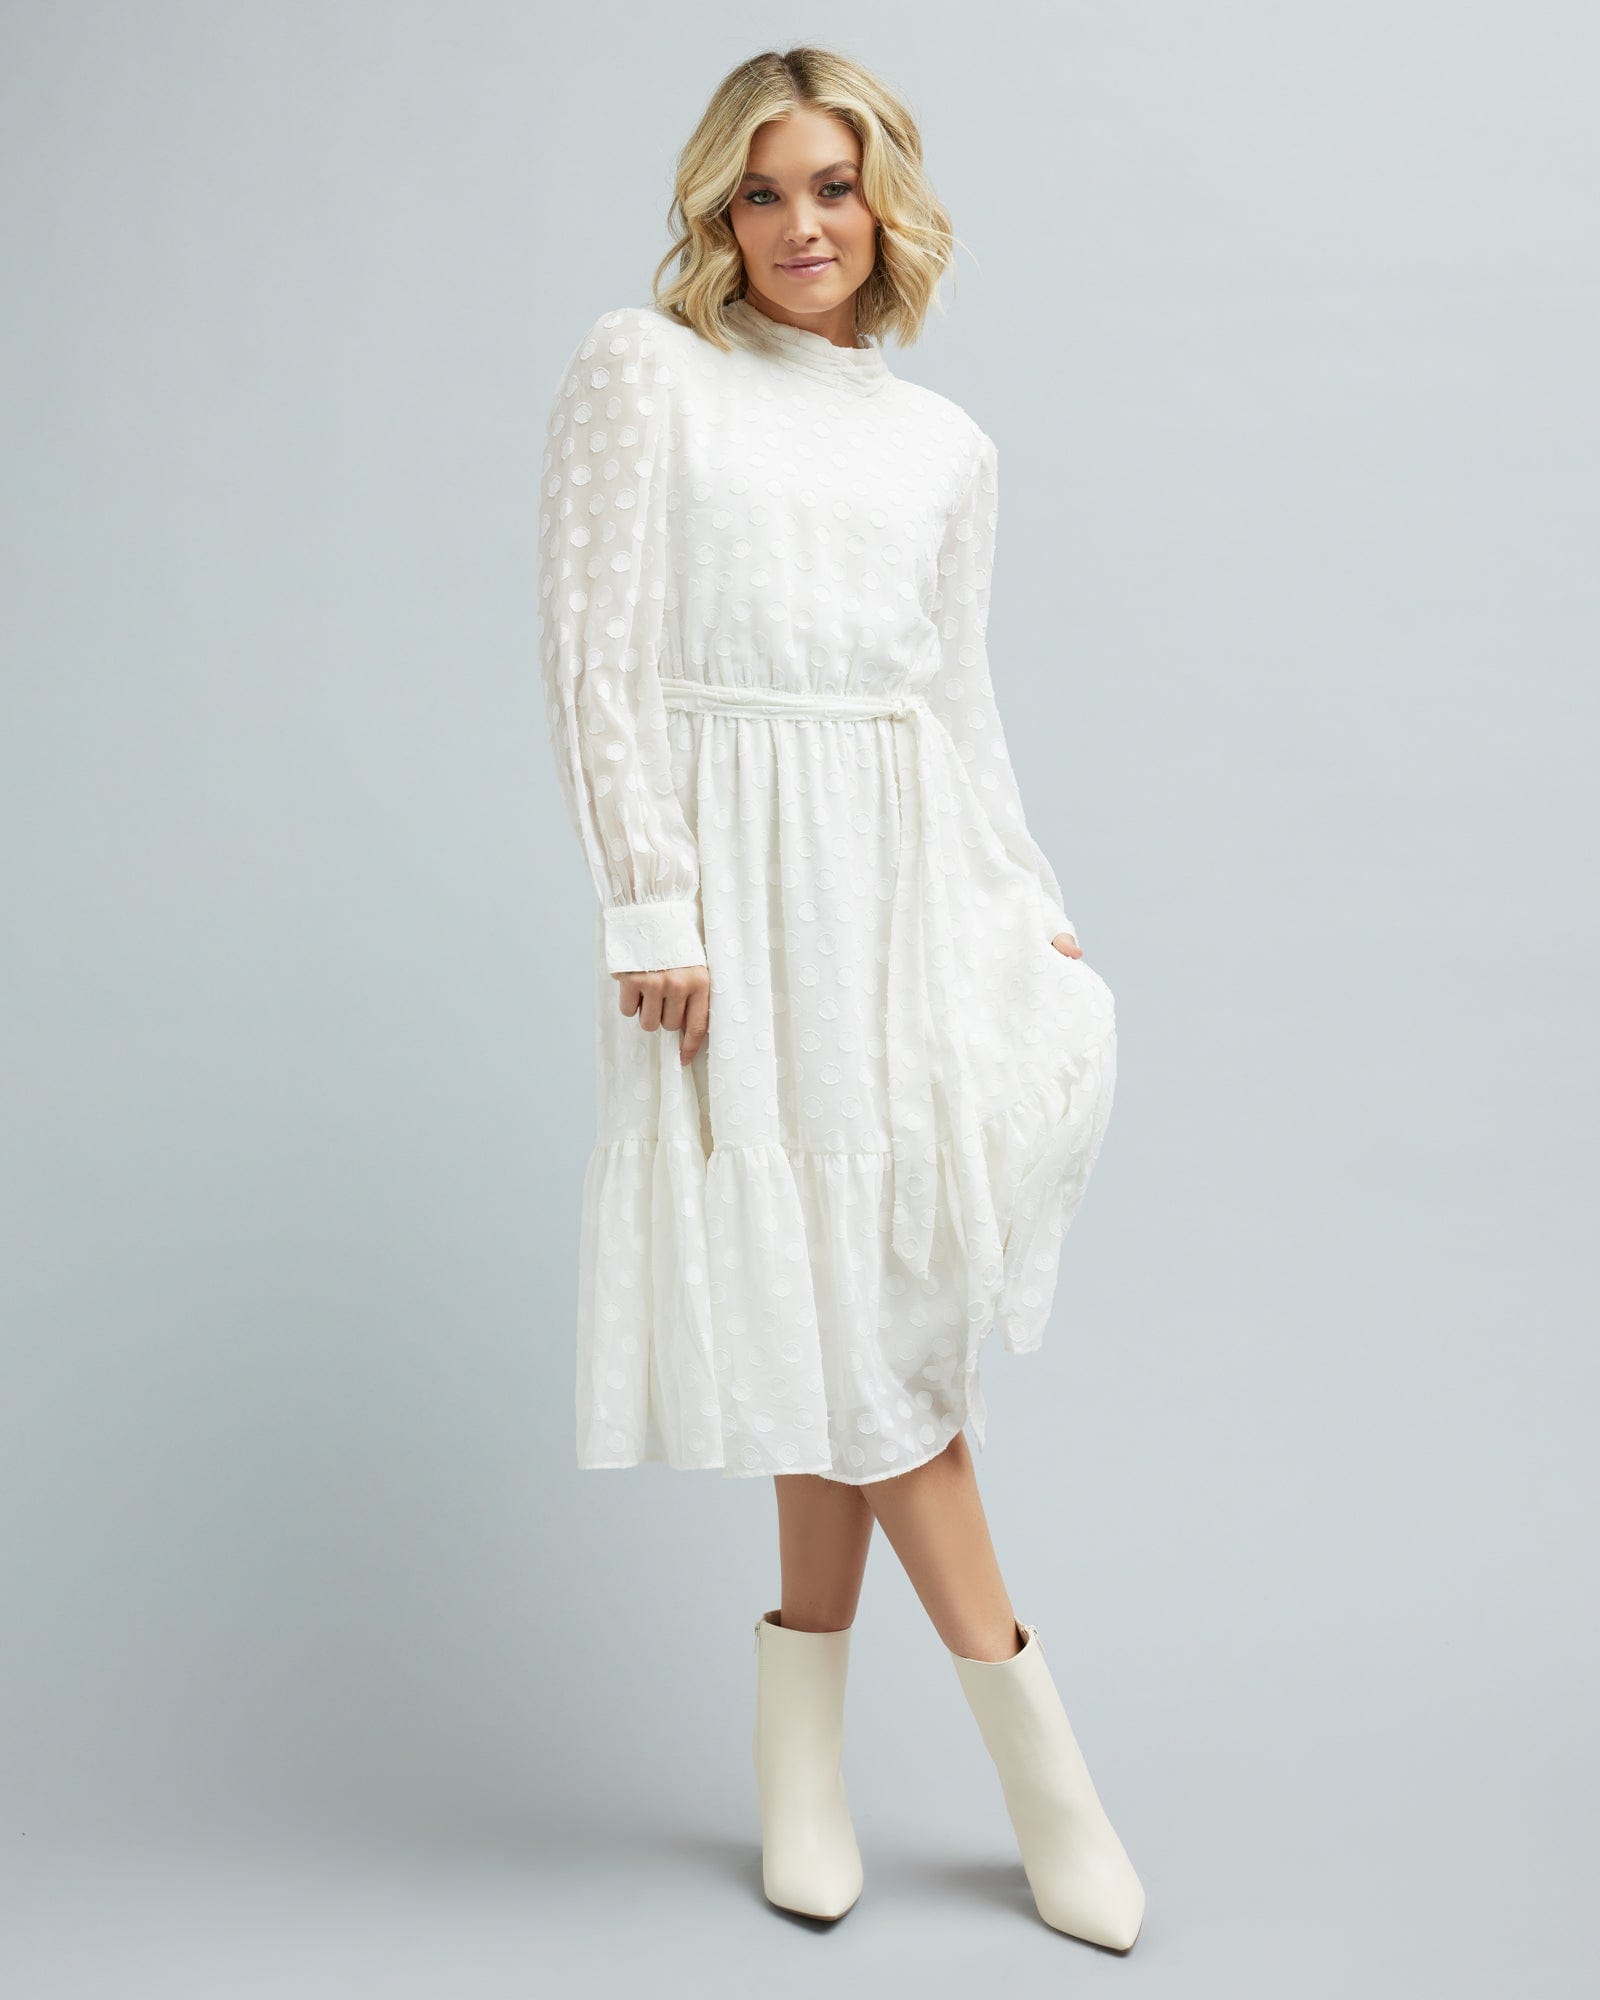 Woman in a long sleeve, white, midi length dress with white polka dots